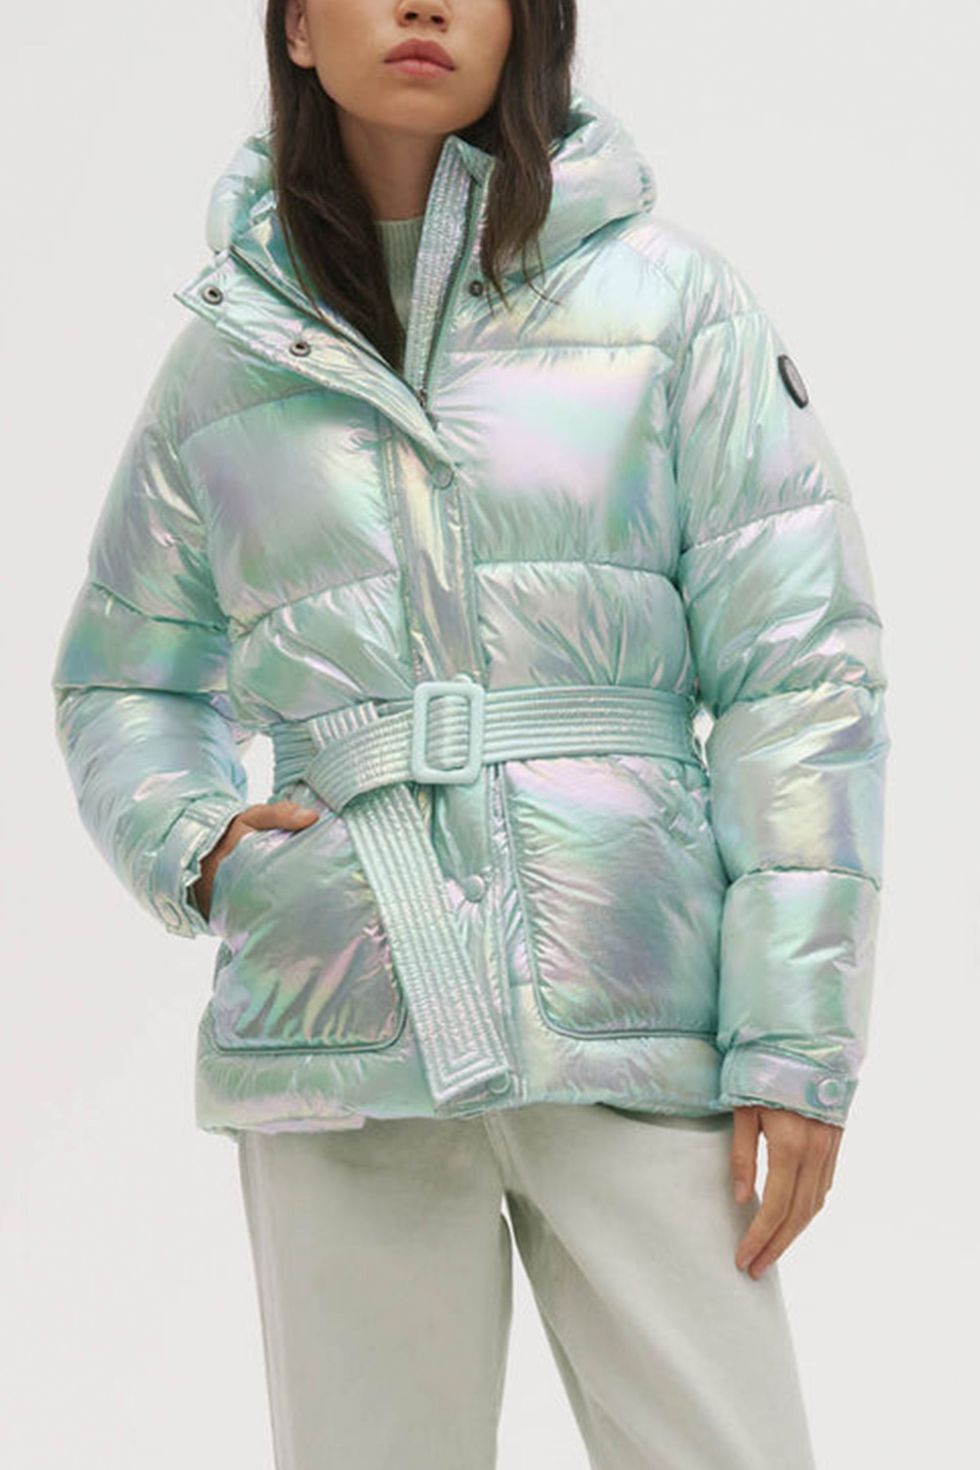 Womens Cropped Puffer Jacket Oversized Colorful Short Puffy Winter Coat 